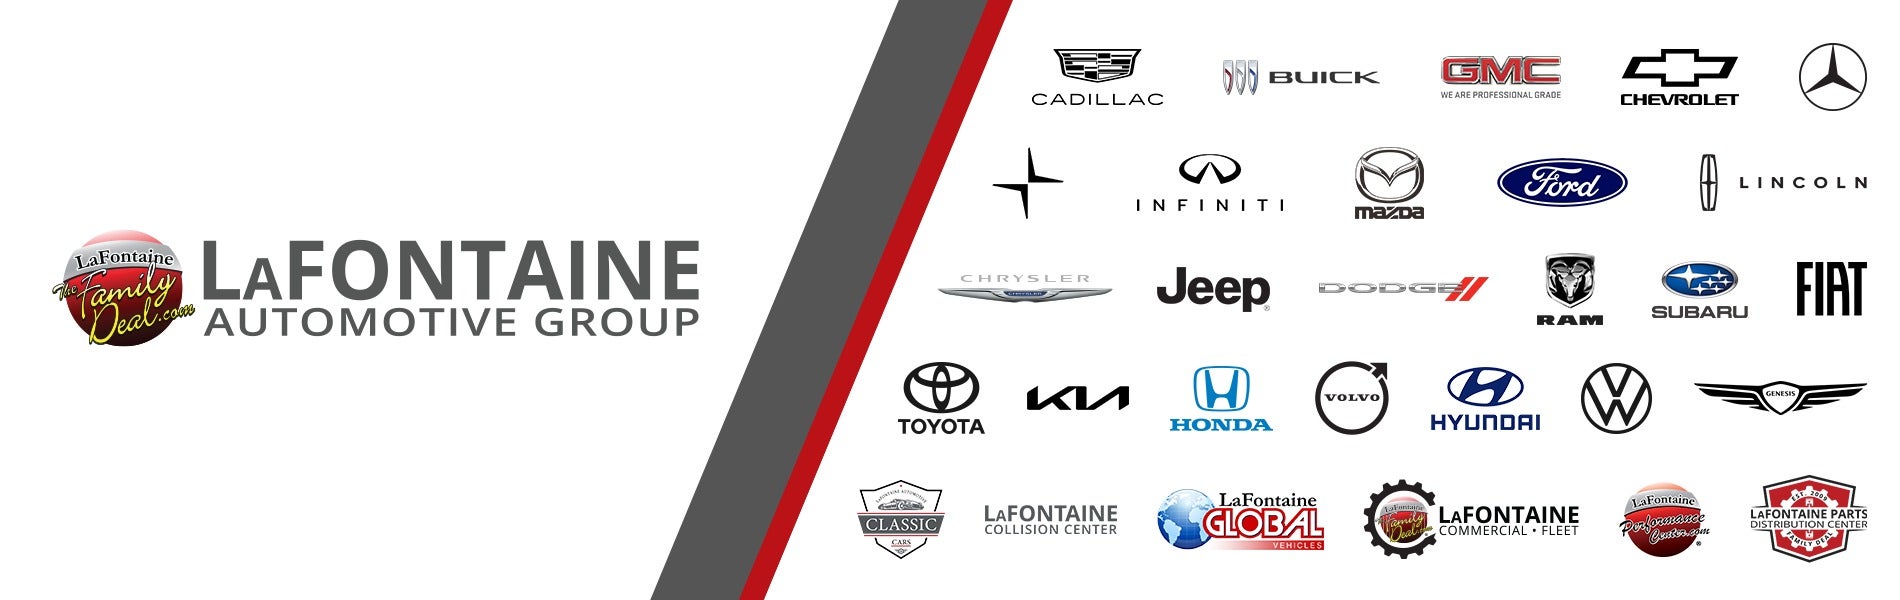 Lafontaine Automotive Group Banner with car make logos